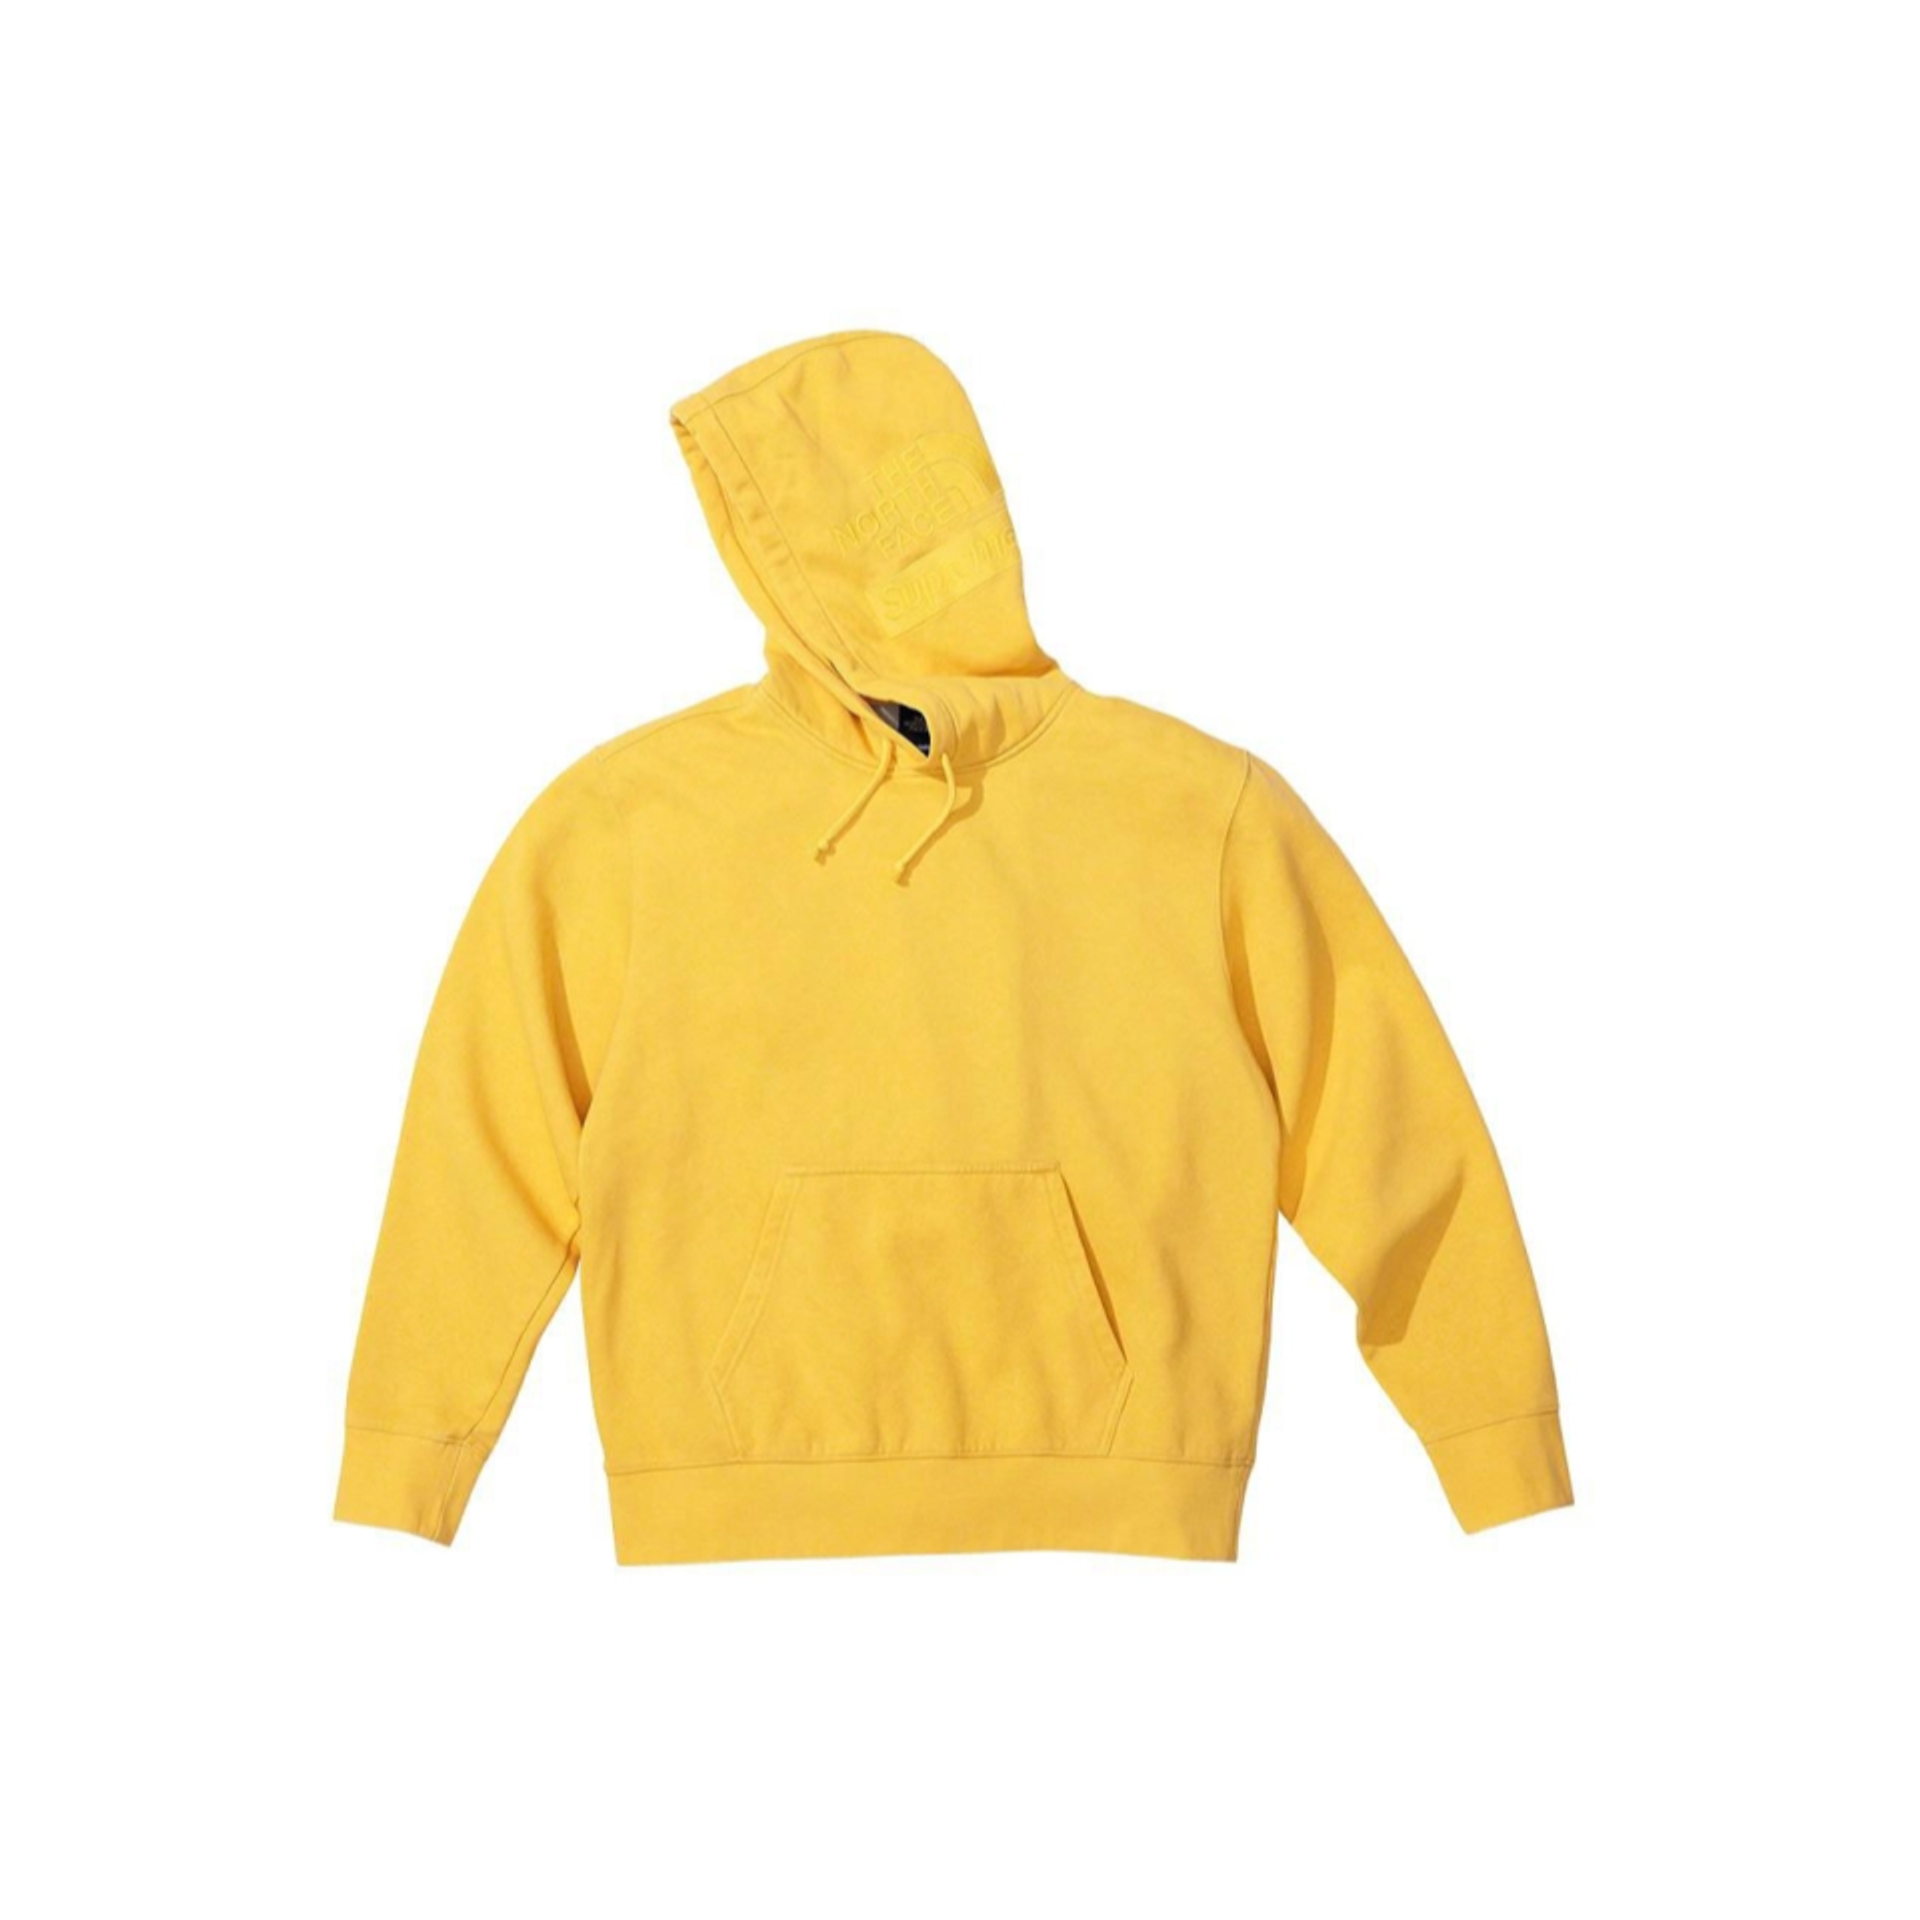 Supreme x The North Face Pigment Printed Hooded Sweatshirt 'Yellow'